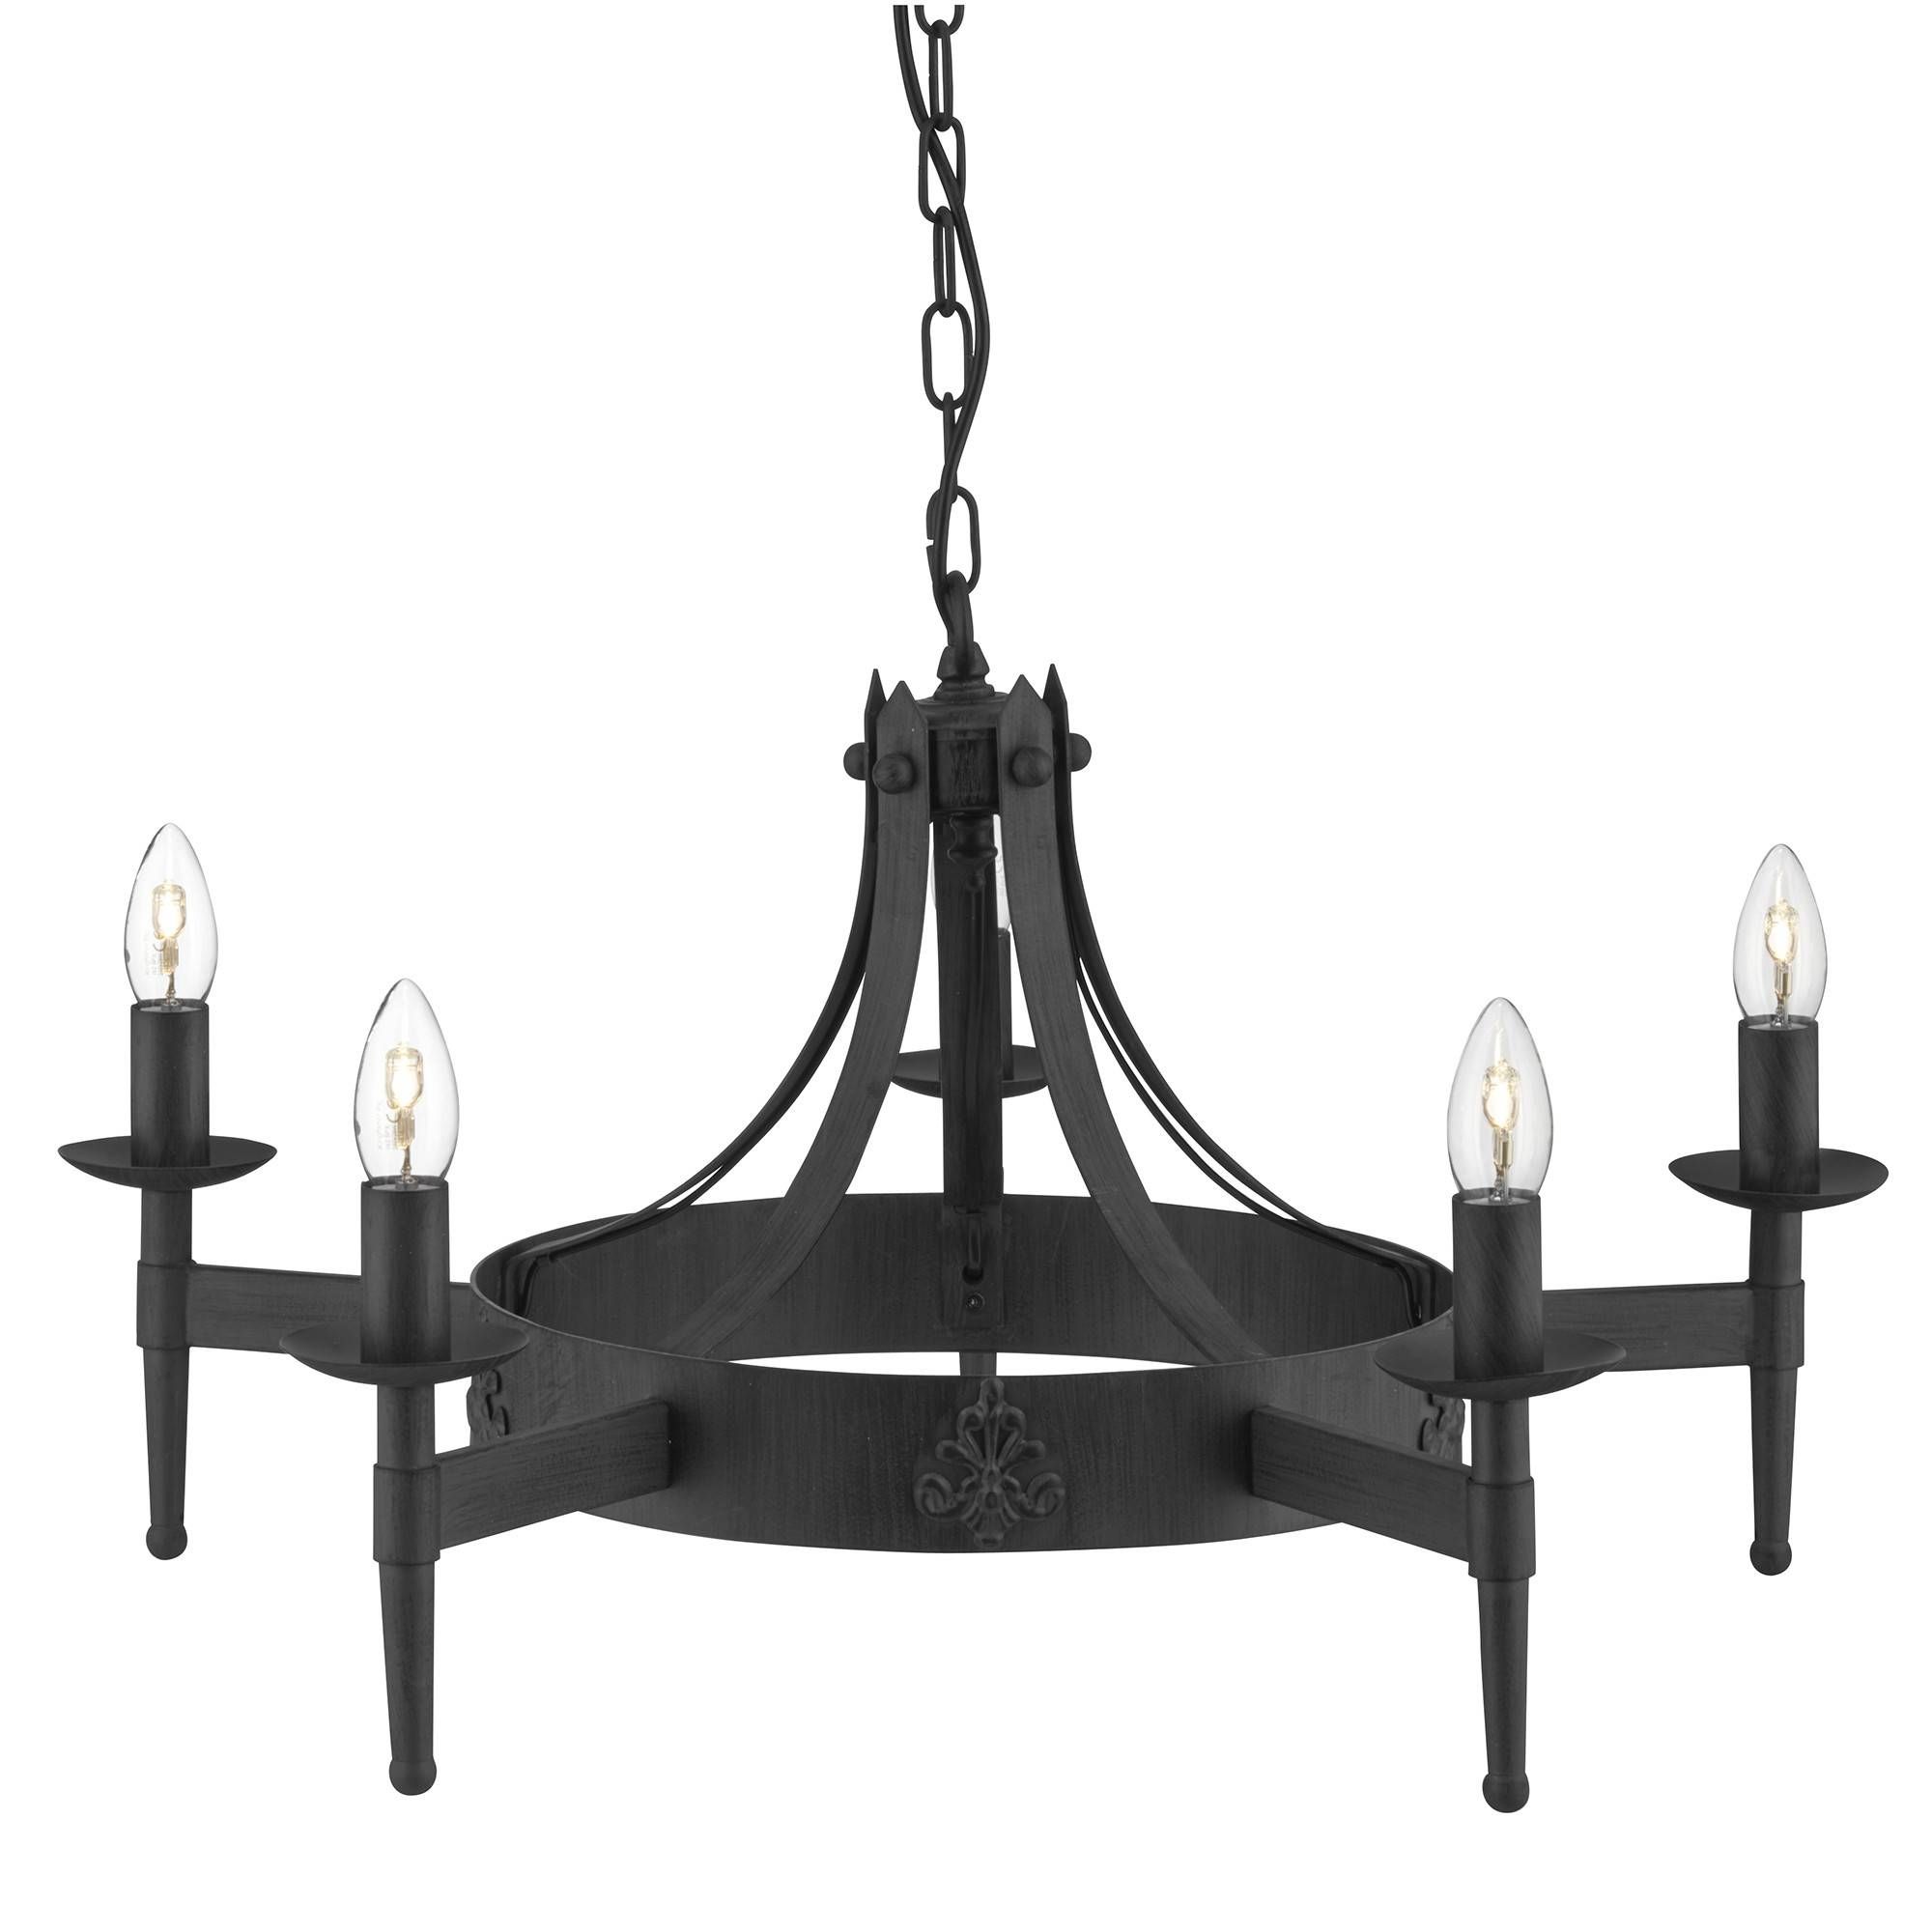 5 Light Fitting In Black Wrought Iron With Regard To Wrought Iron Lights Fittings (Photo 4 of 15)